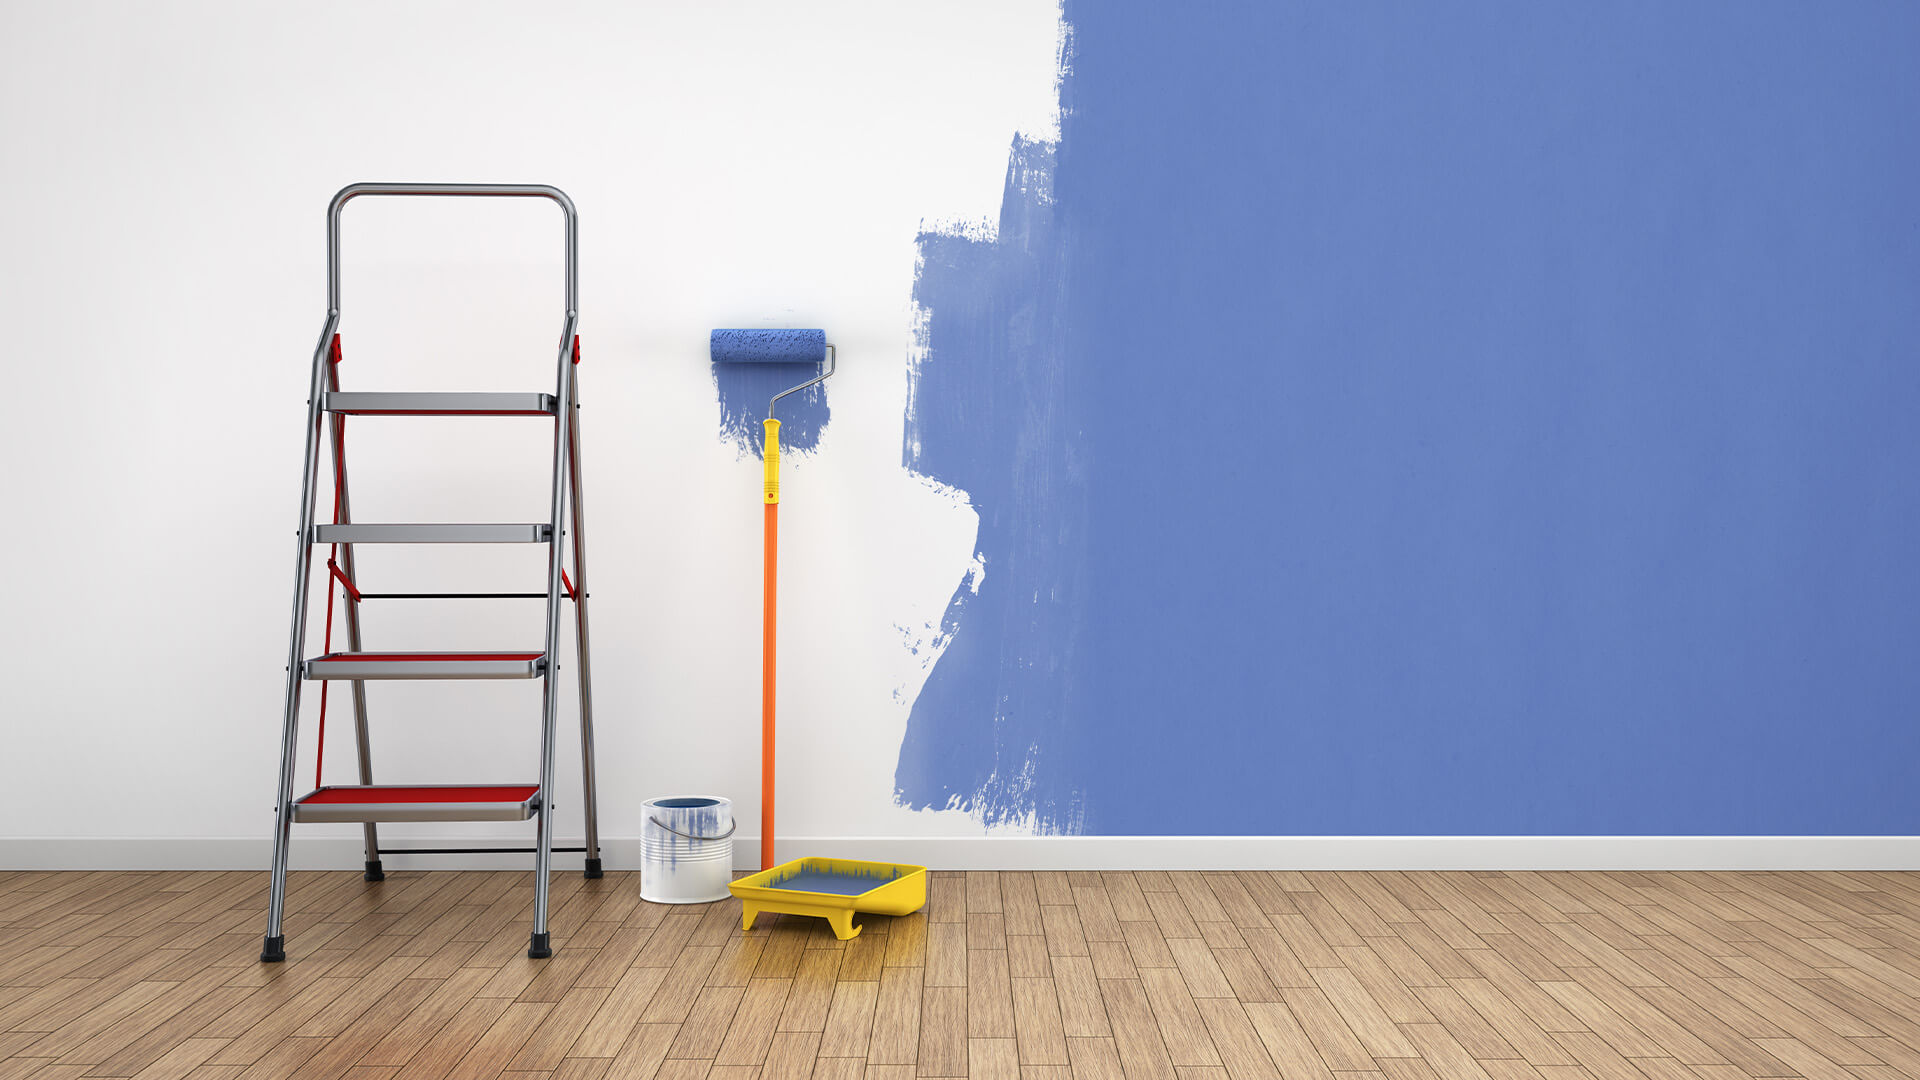 Half painted room with a roller leaning against the wall